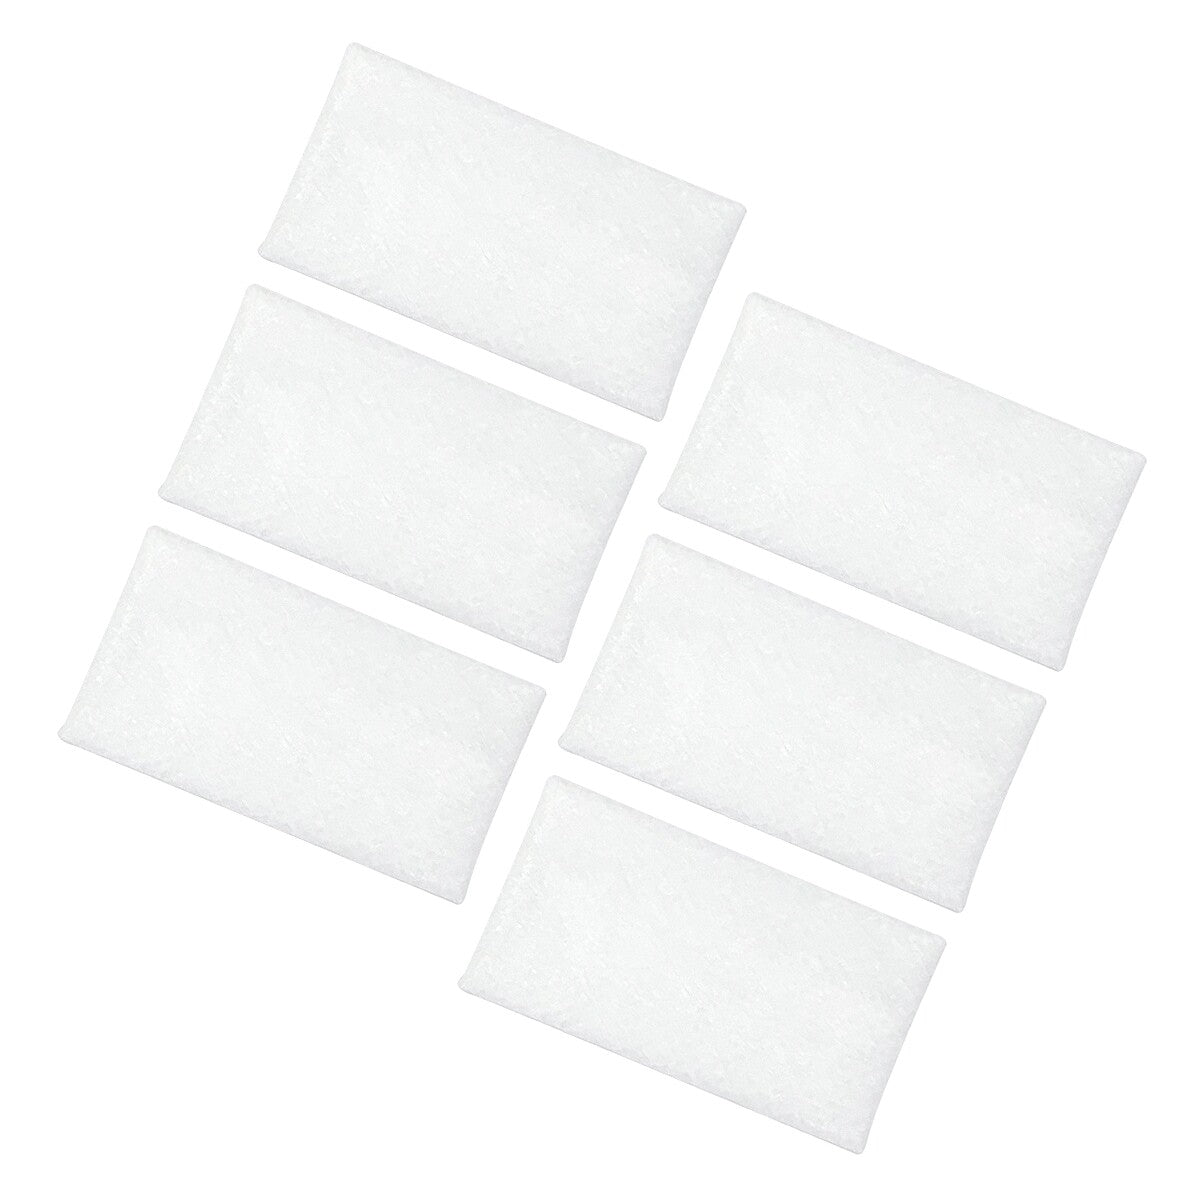 3B Disposable White Ultra Fine Filter for Luna II Series CPAP Machines (6-Pack)